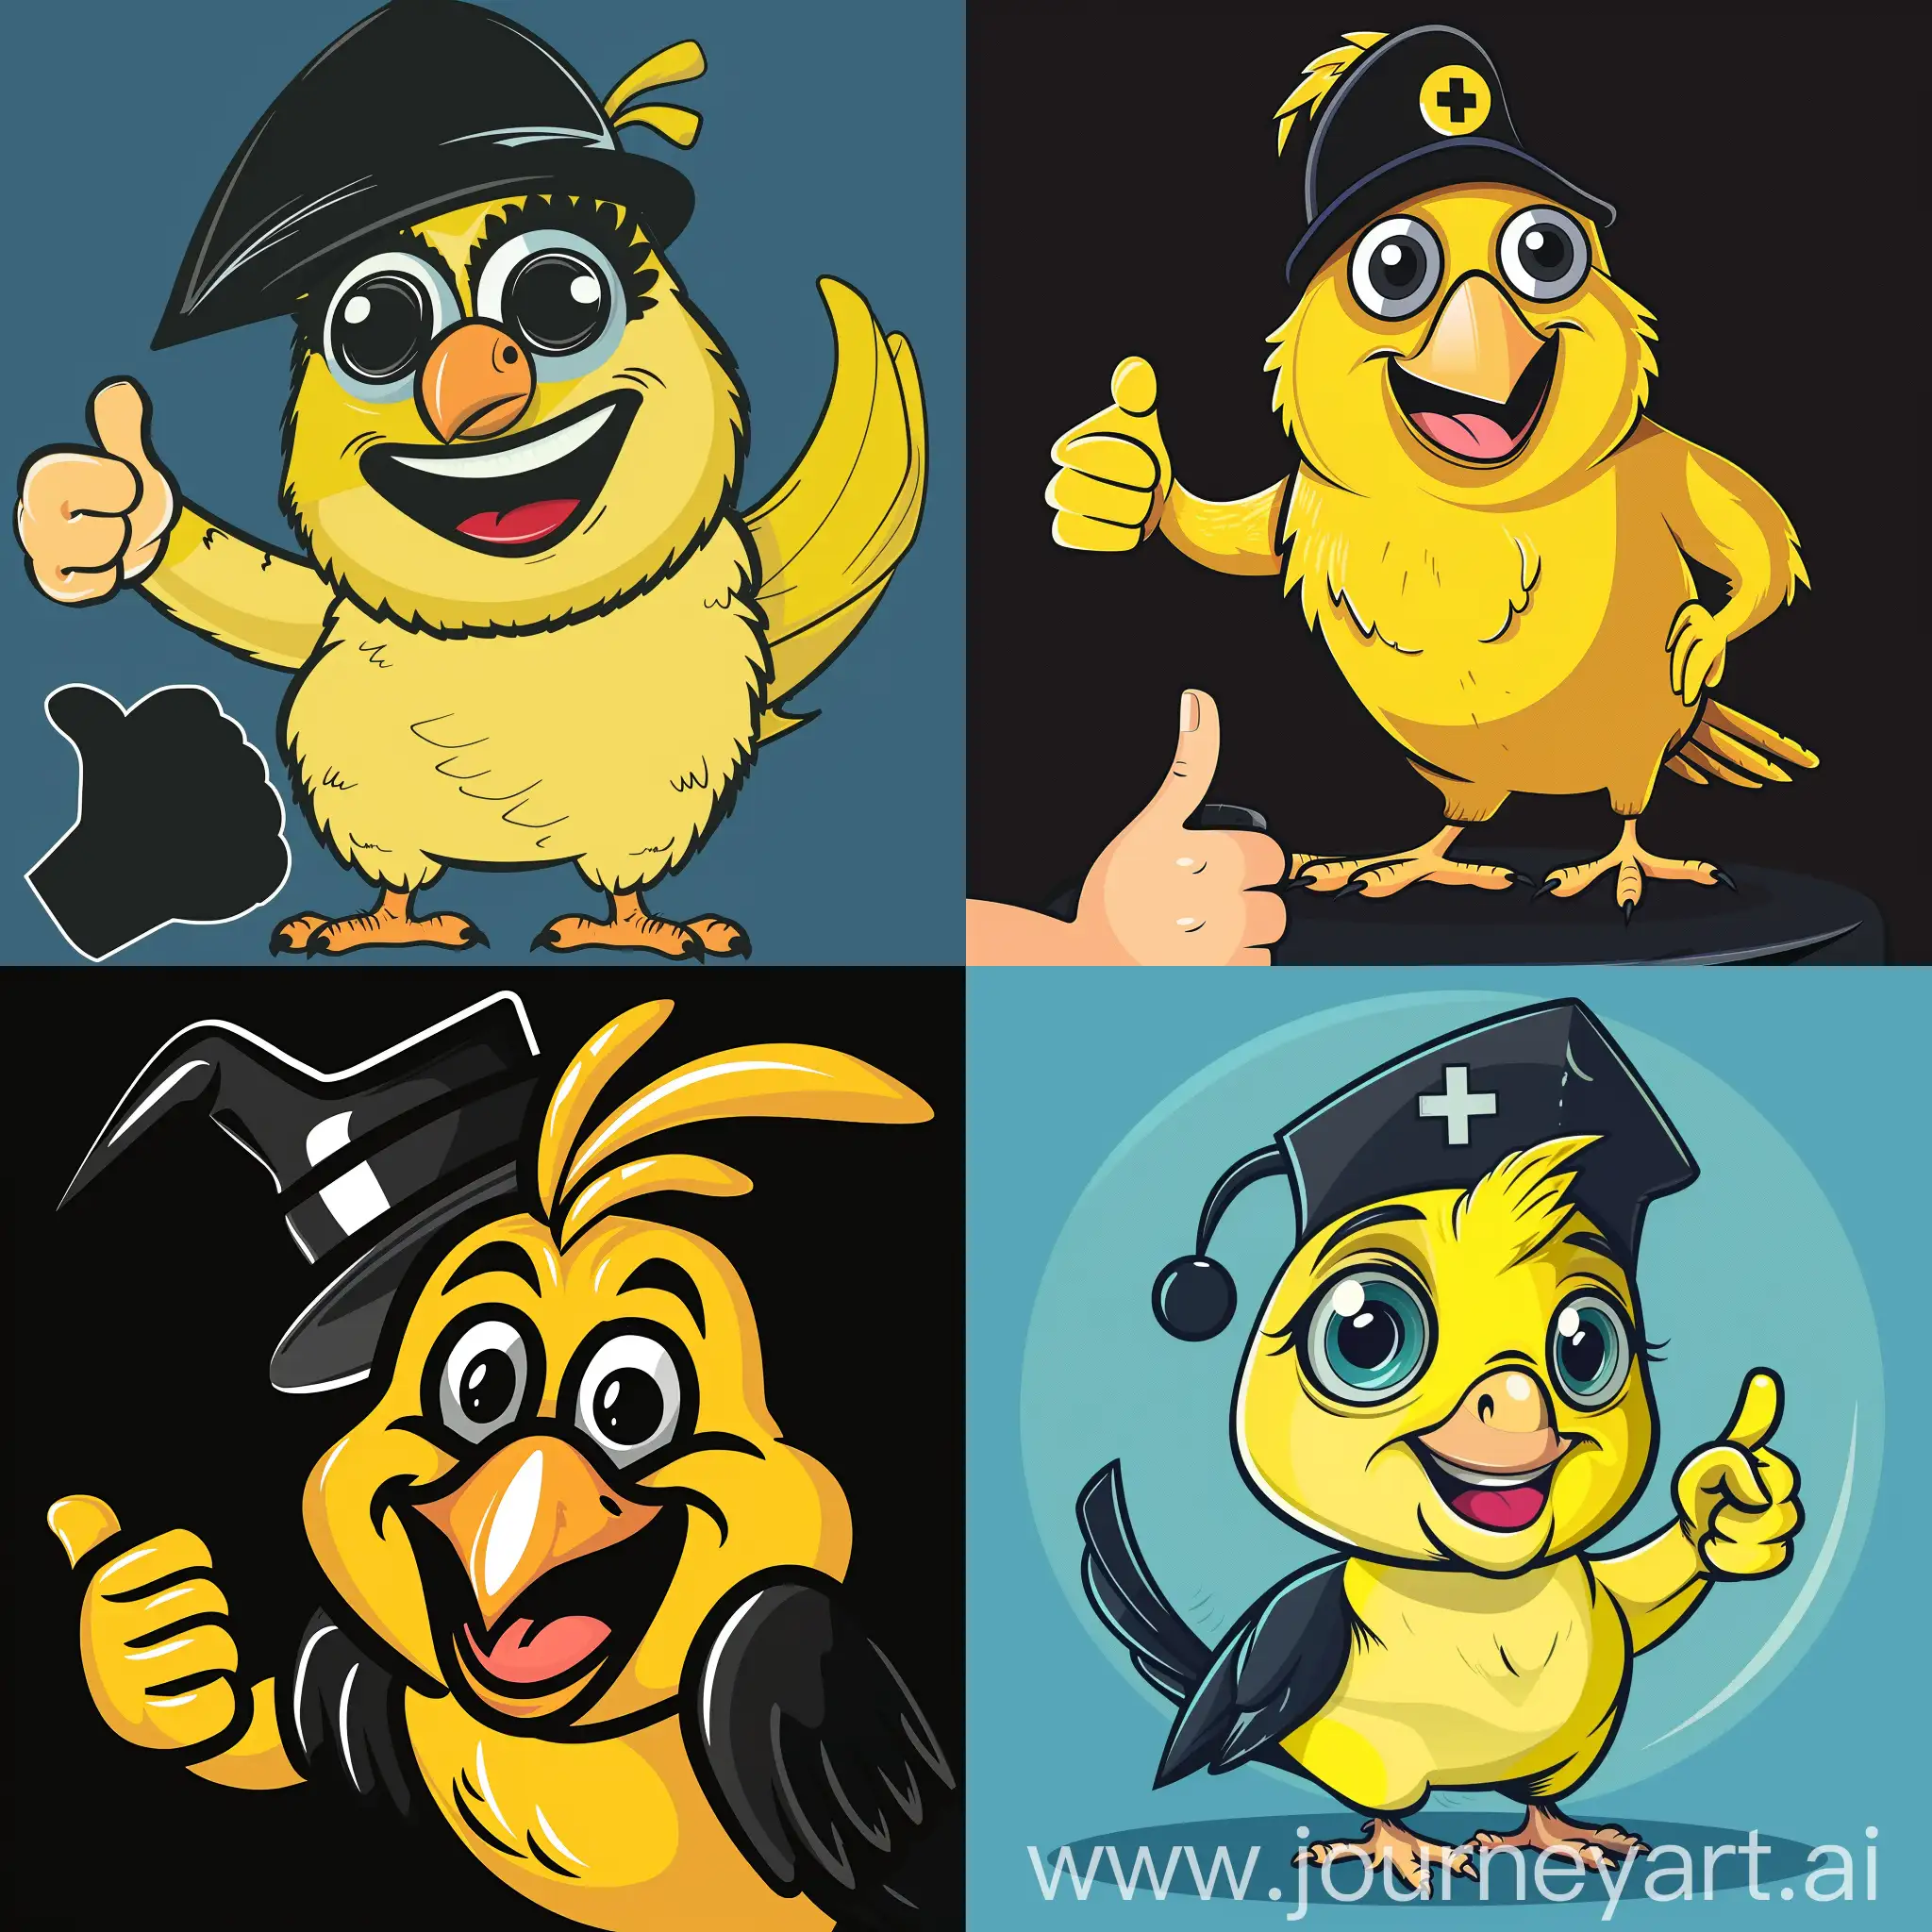 Cartoon Yellow cockatiel wearing doctoral hat, black classes proudly Pure background. Only half body on the bottom left, with smile and thumb up.